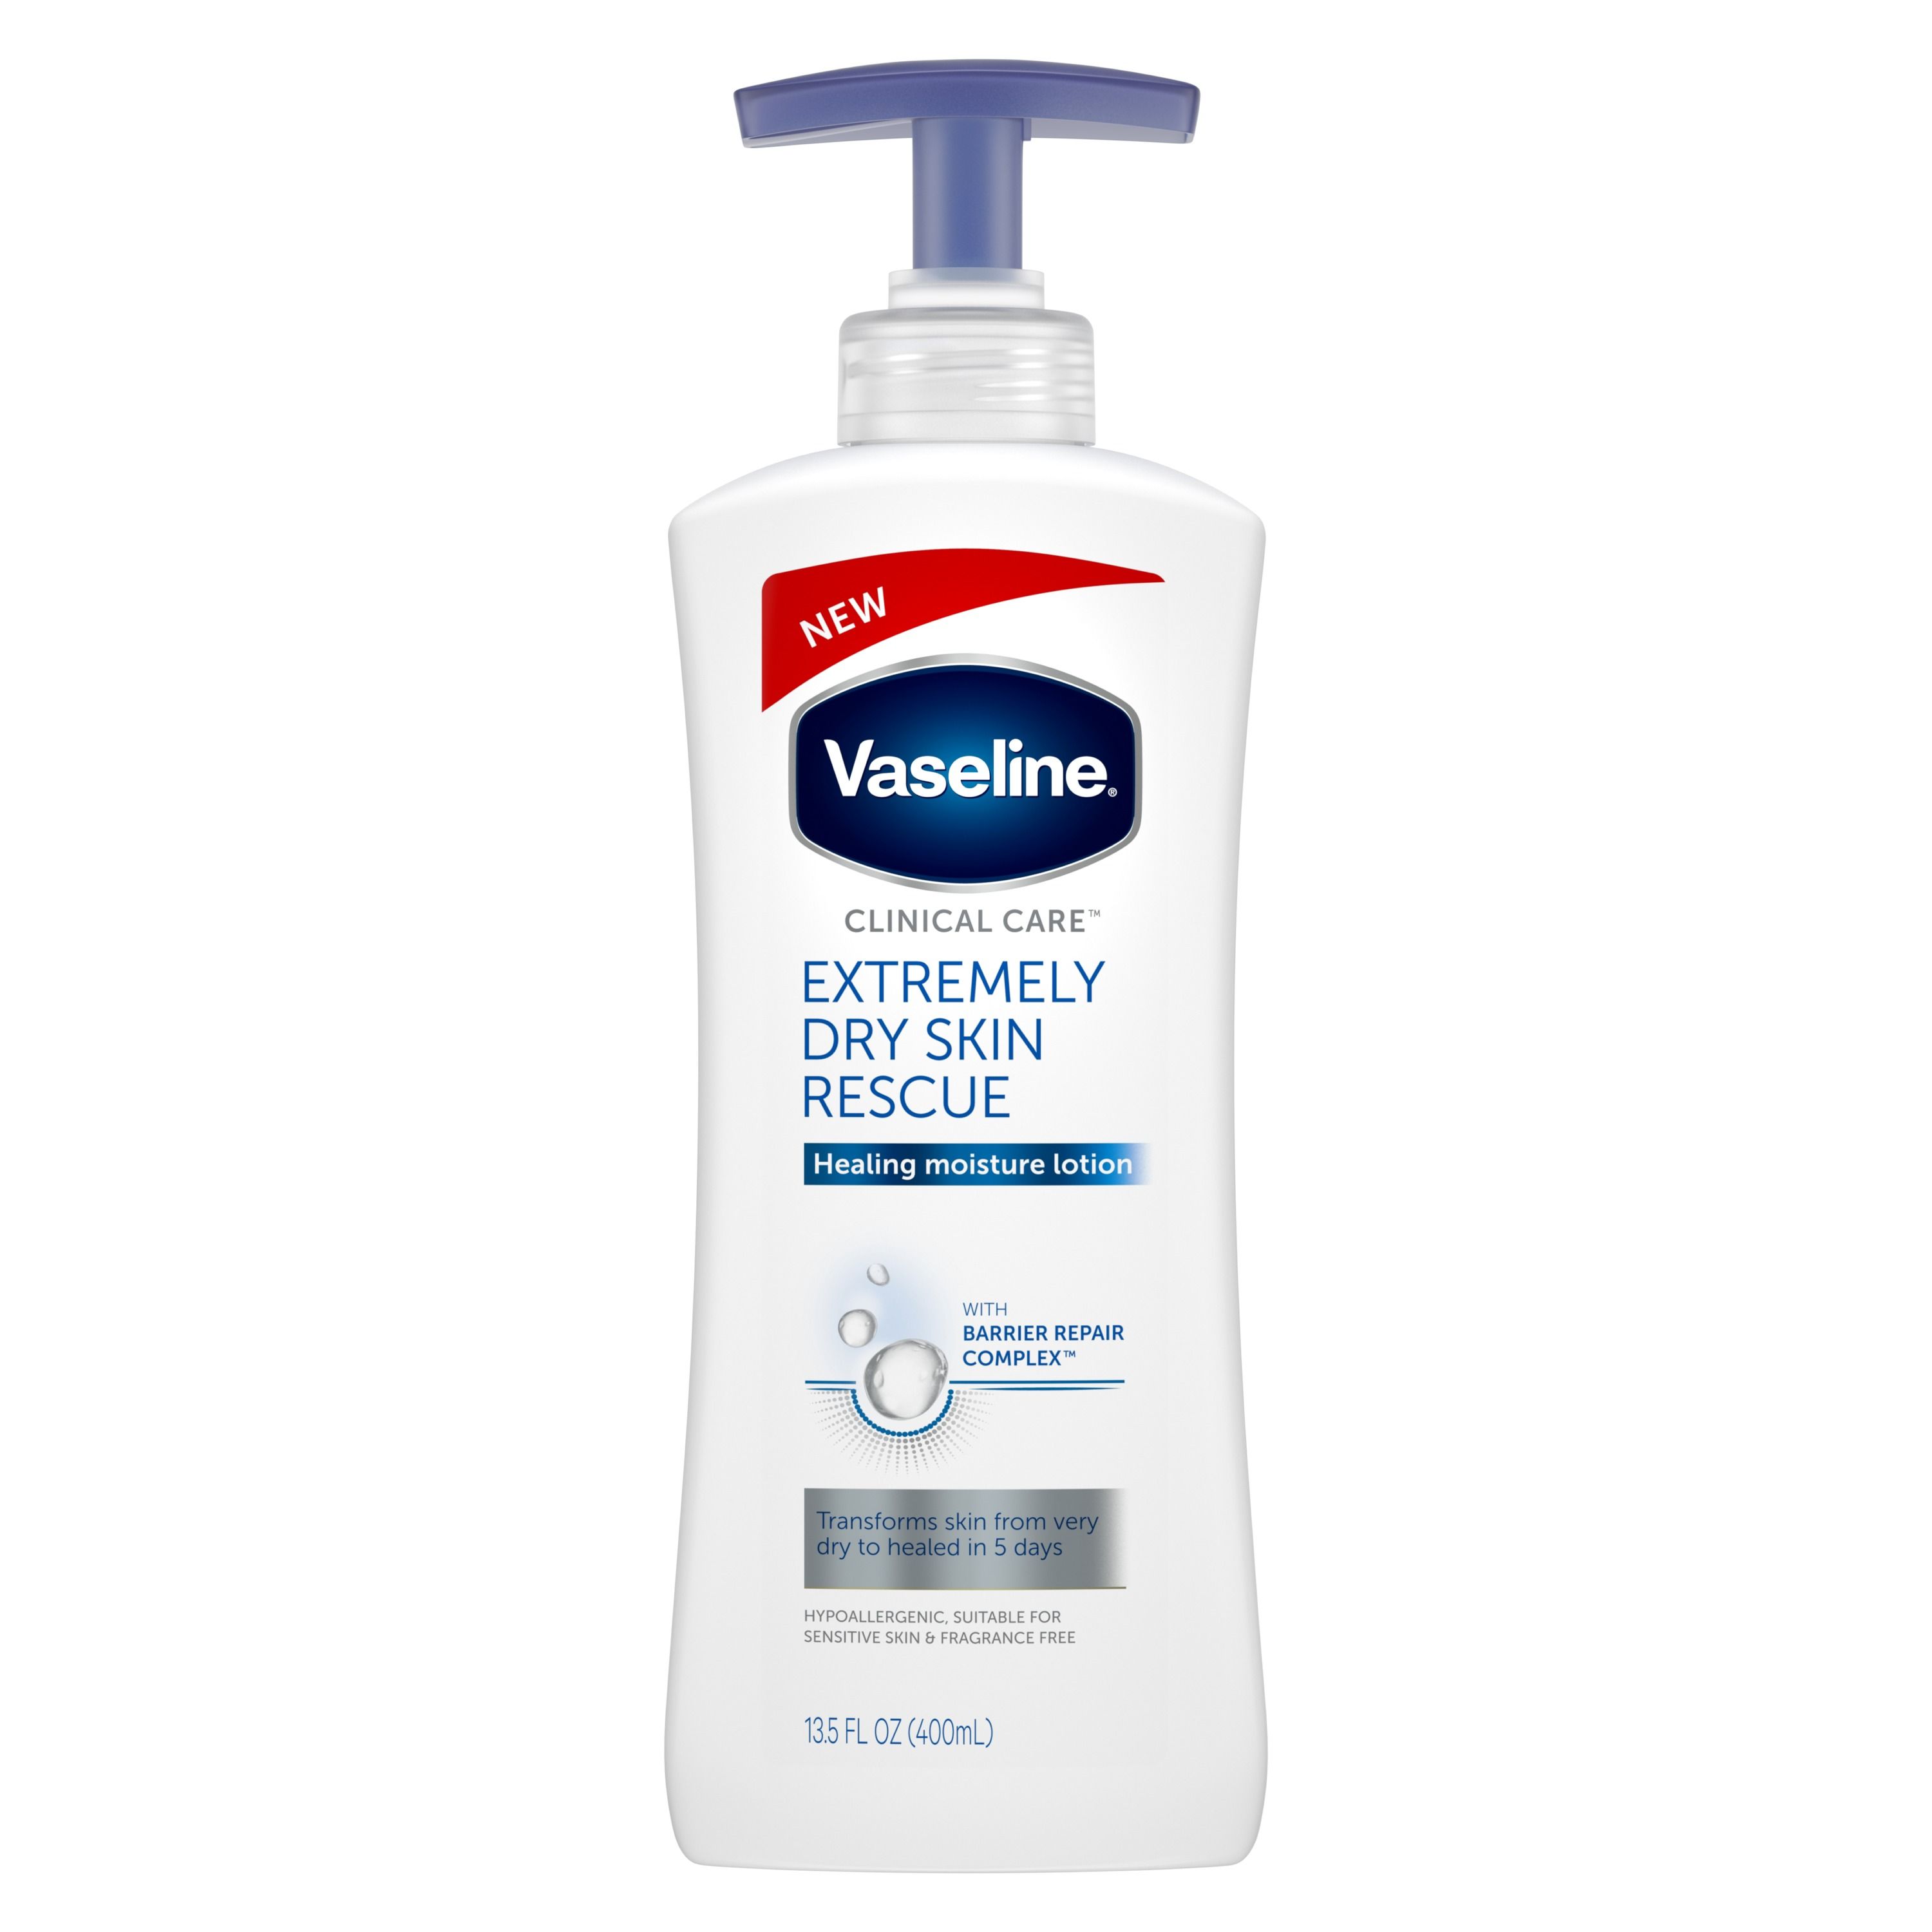 Vaseline Clinical Care Extremely Dry Skin Rescue Body Lotion